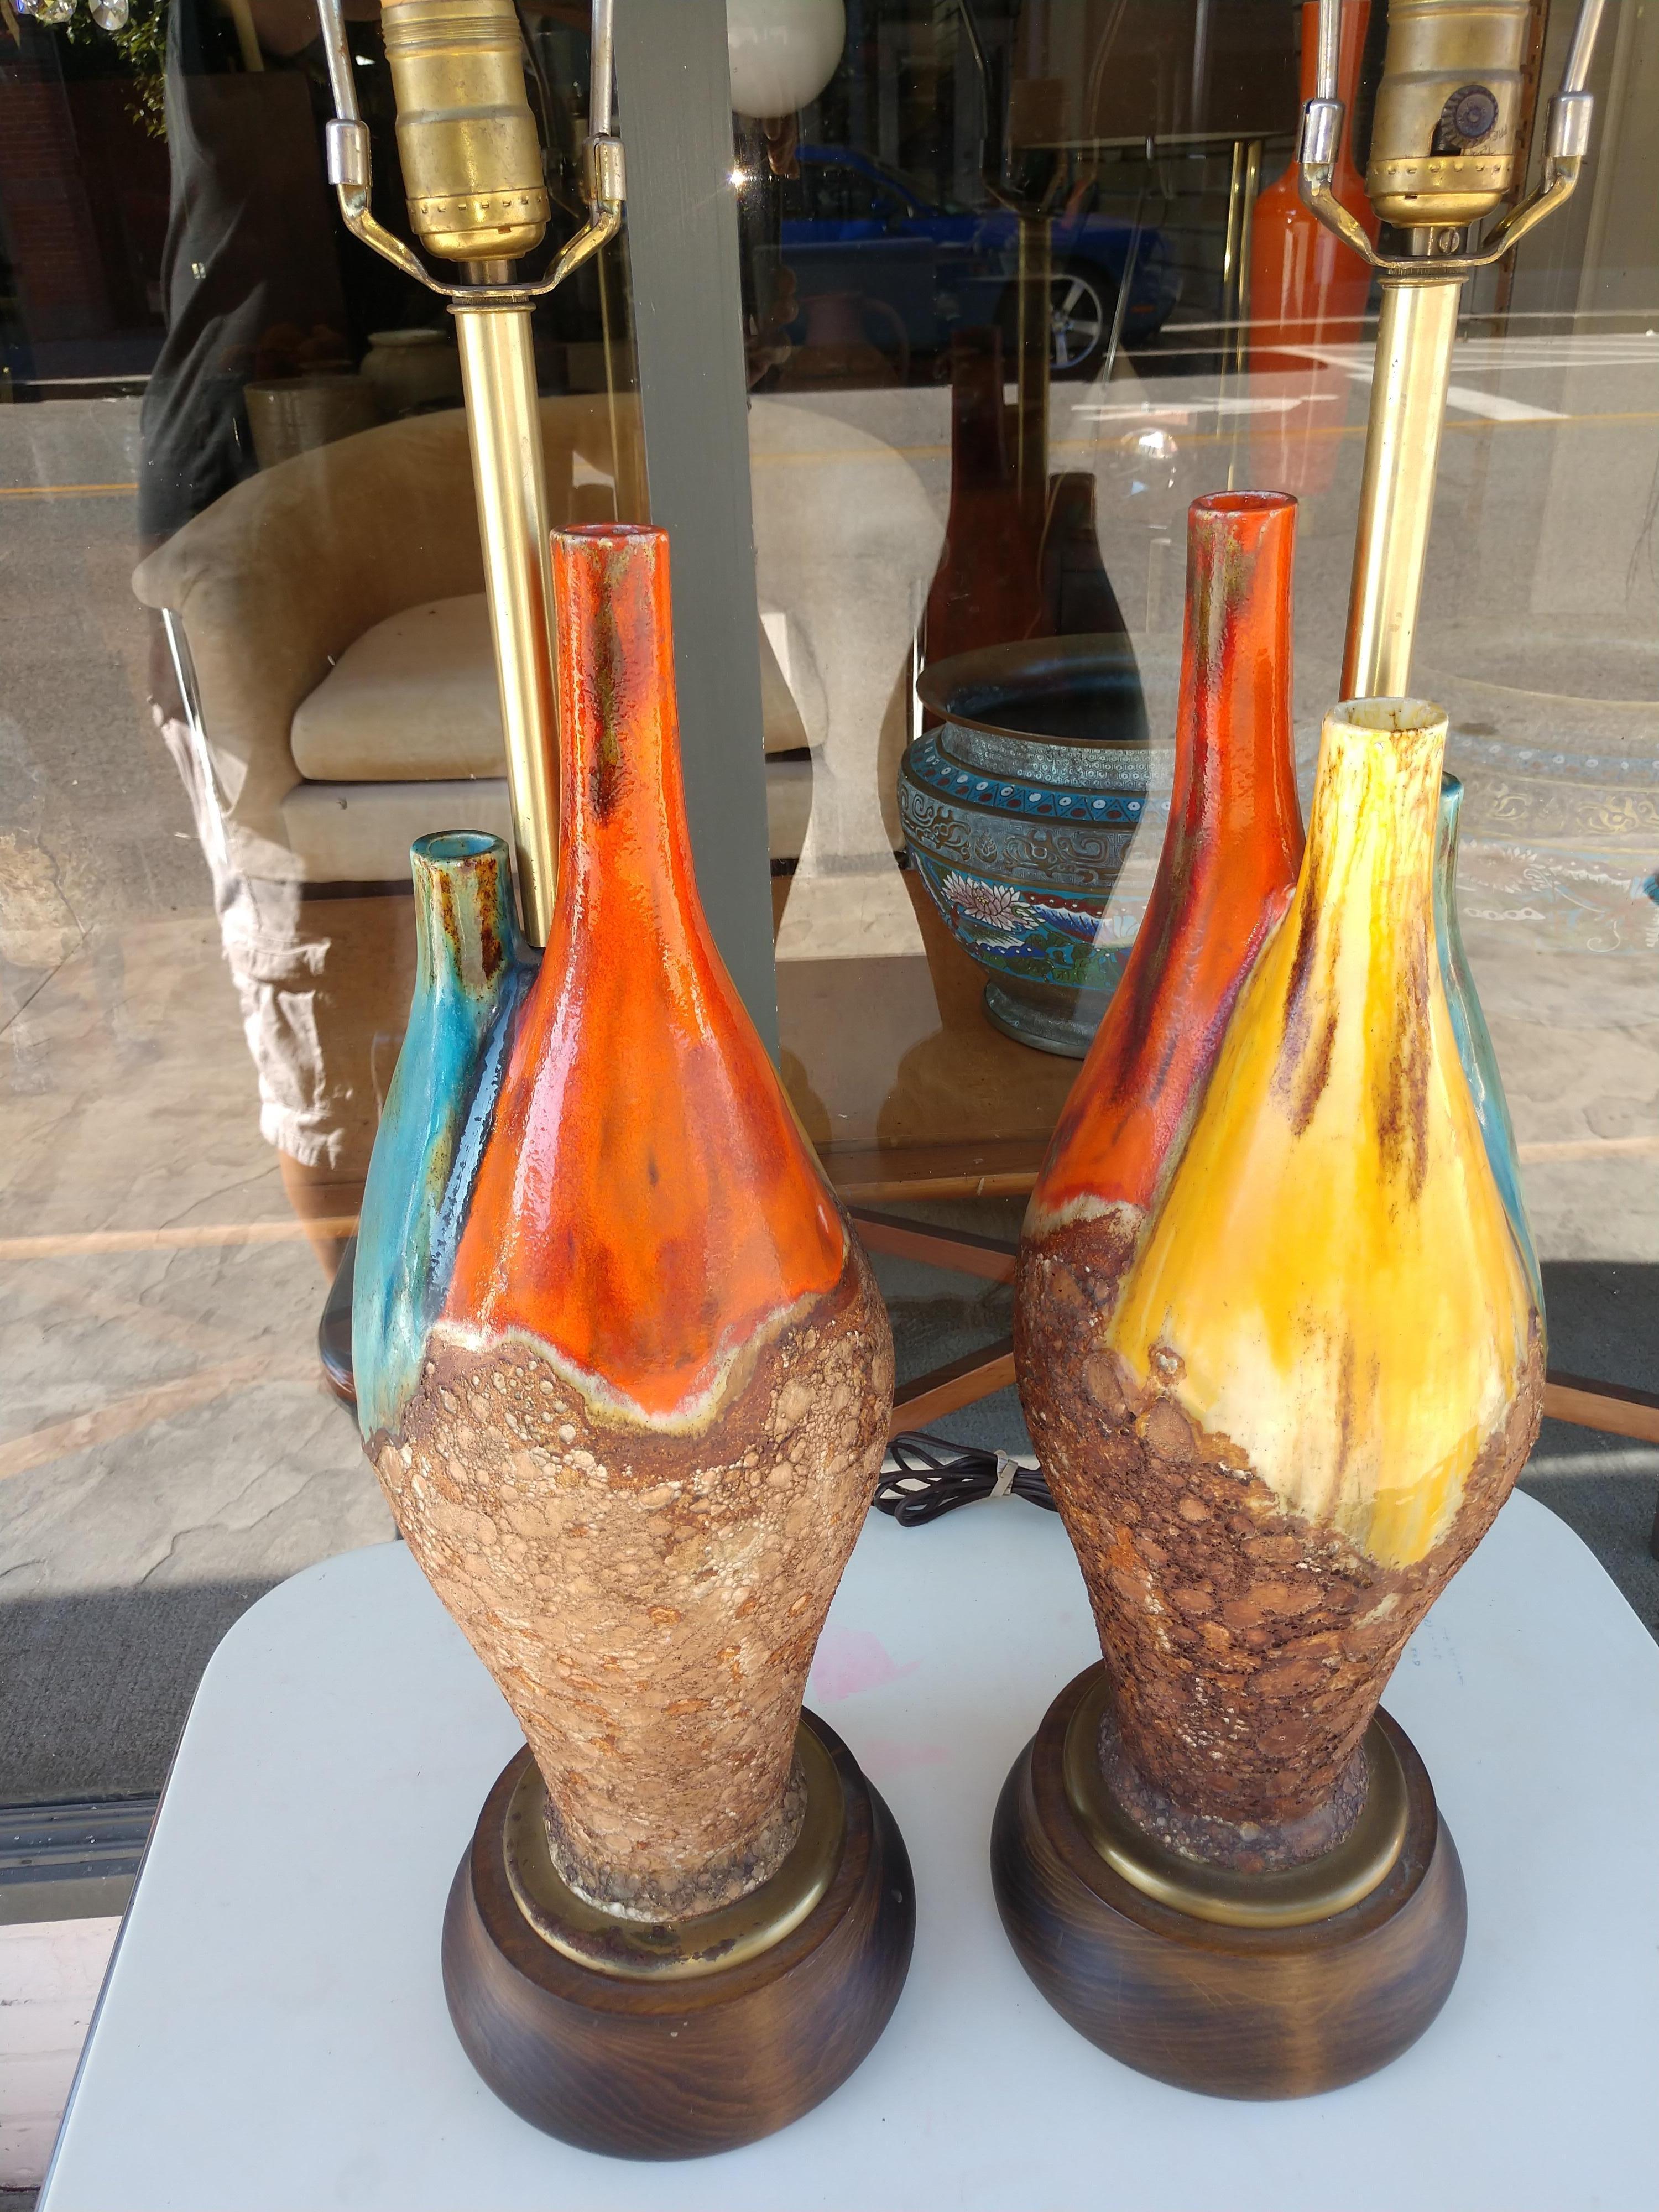 Italian Pair of Mid-Century Modern Pottery Lamps in a TRI Bottle Form